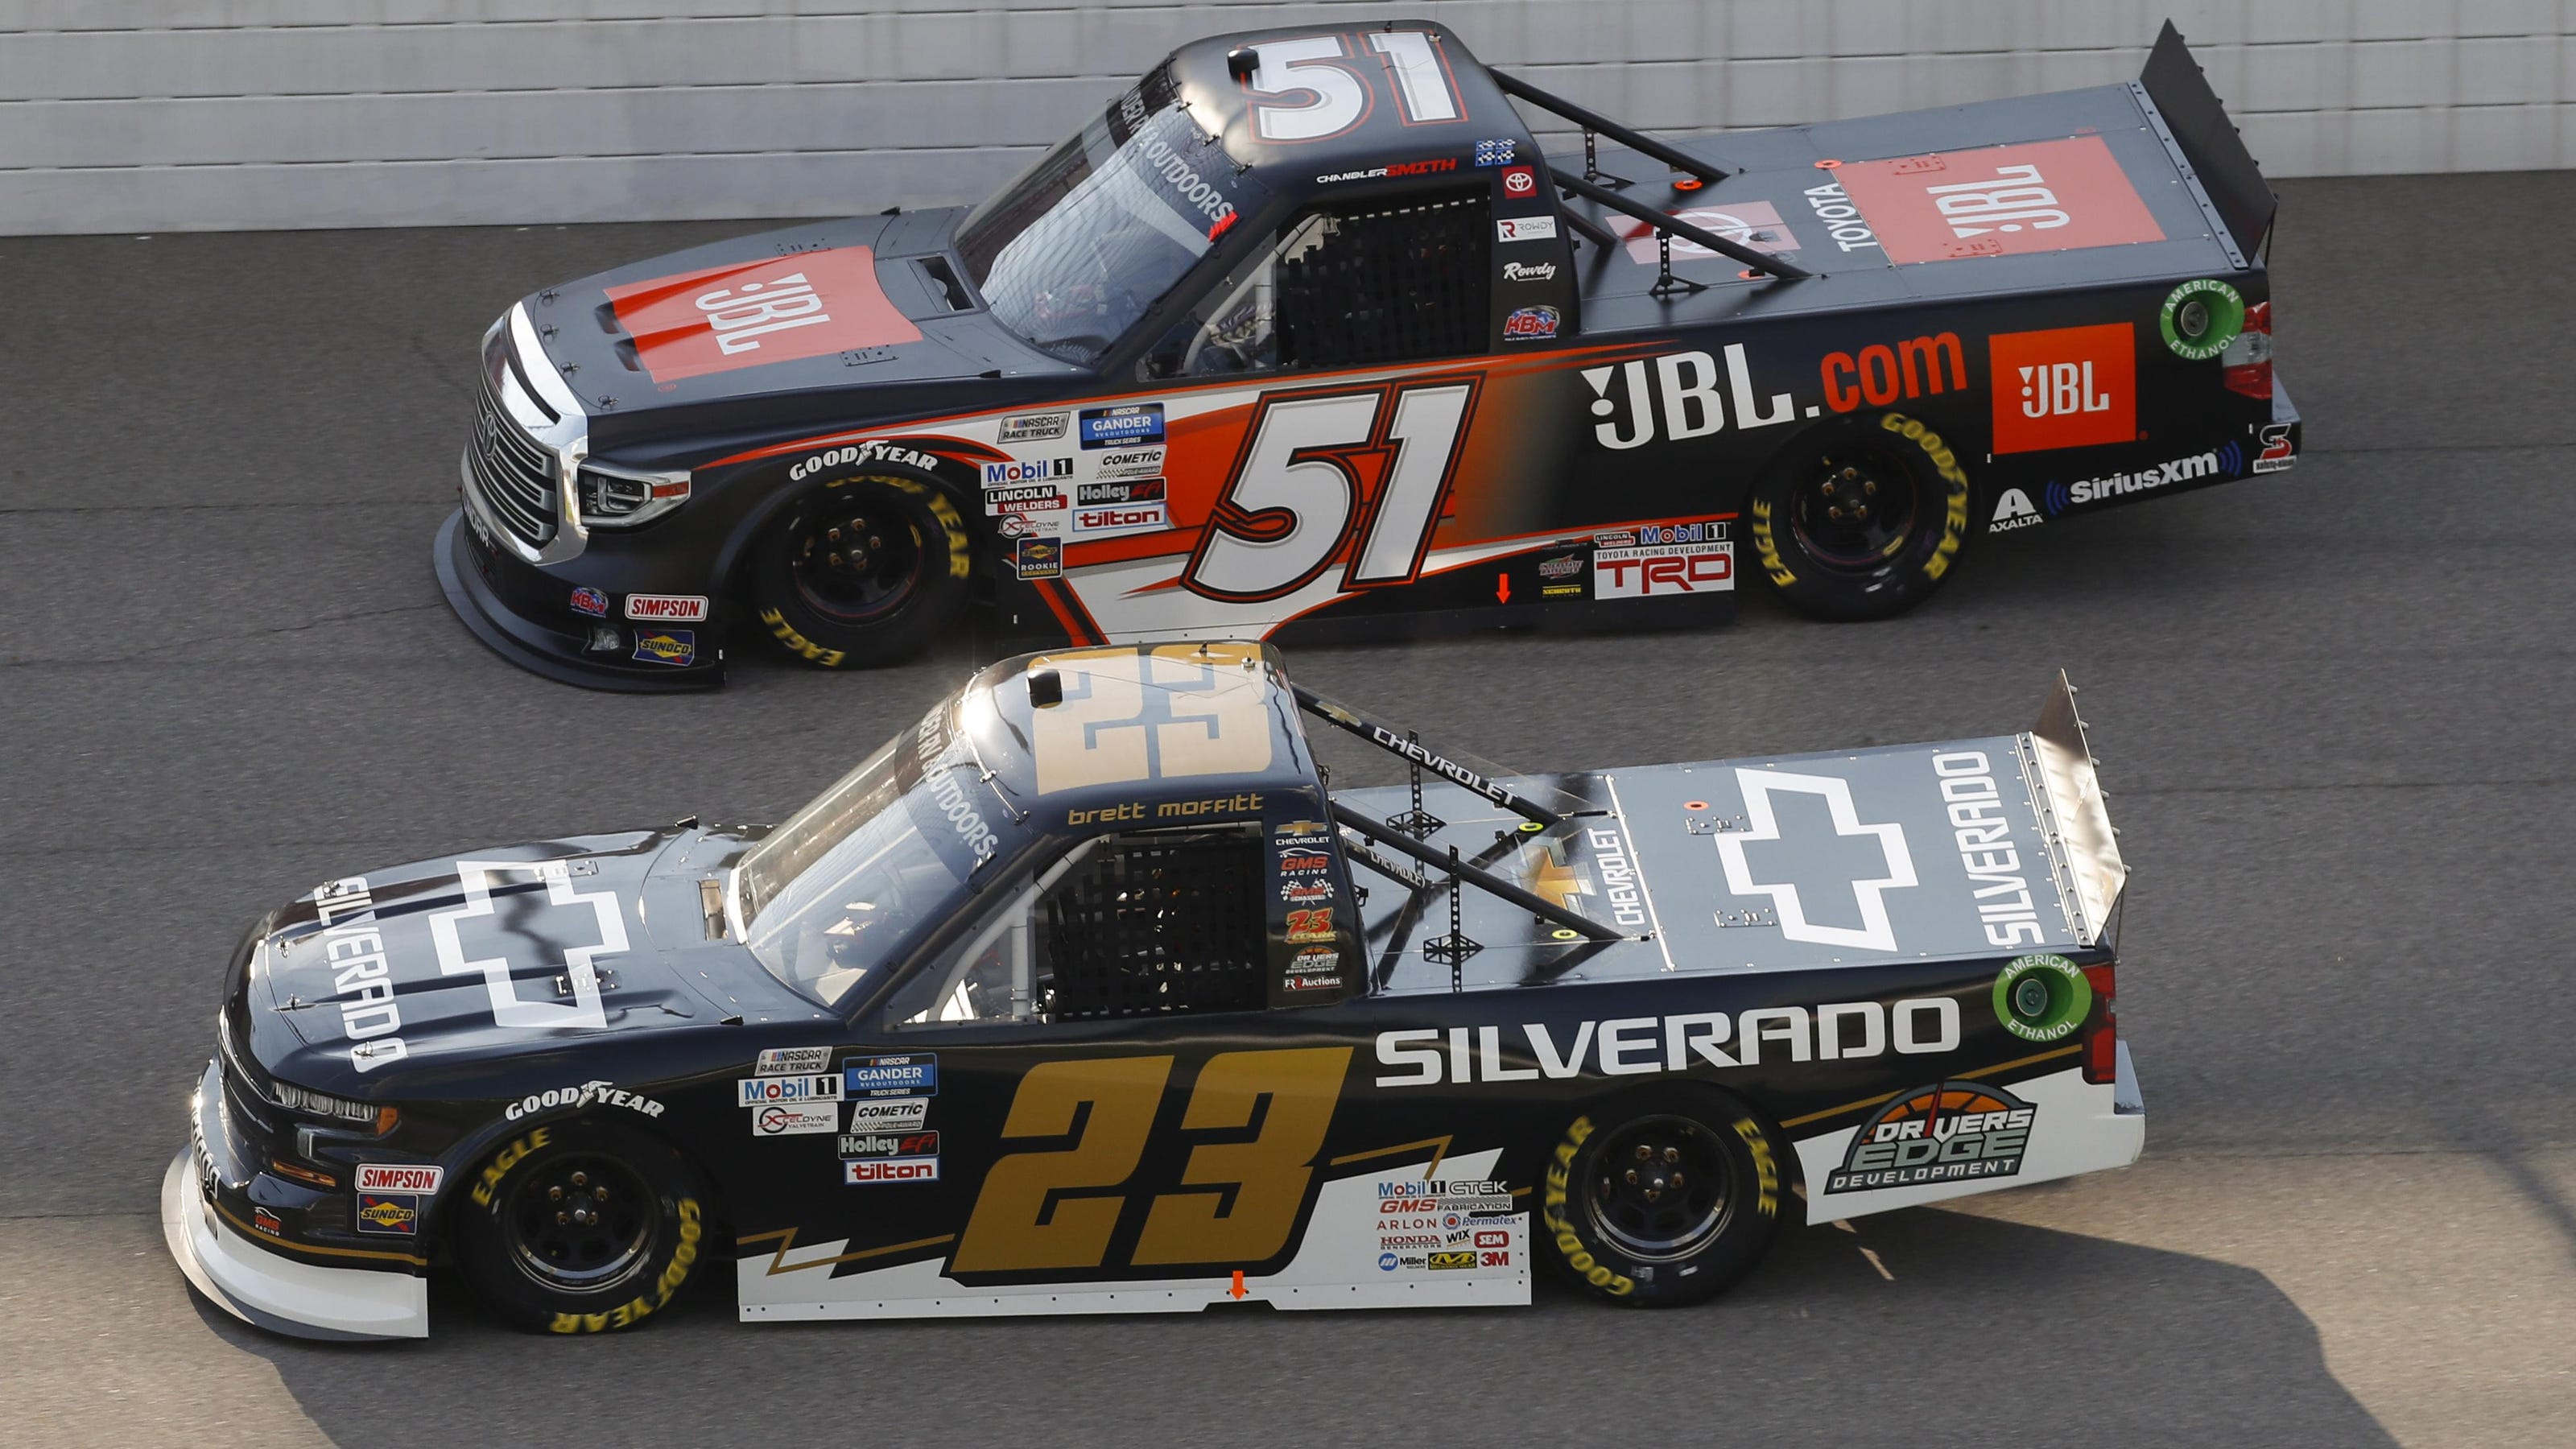 GMS Racing team has 75 percent chance to win NASCAR Truck Series title